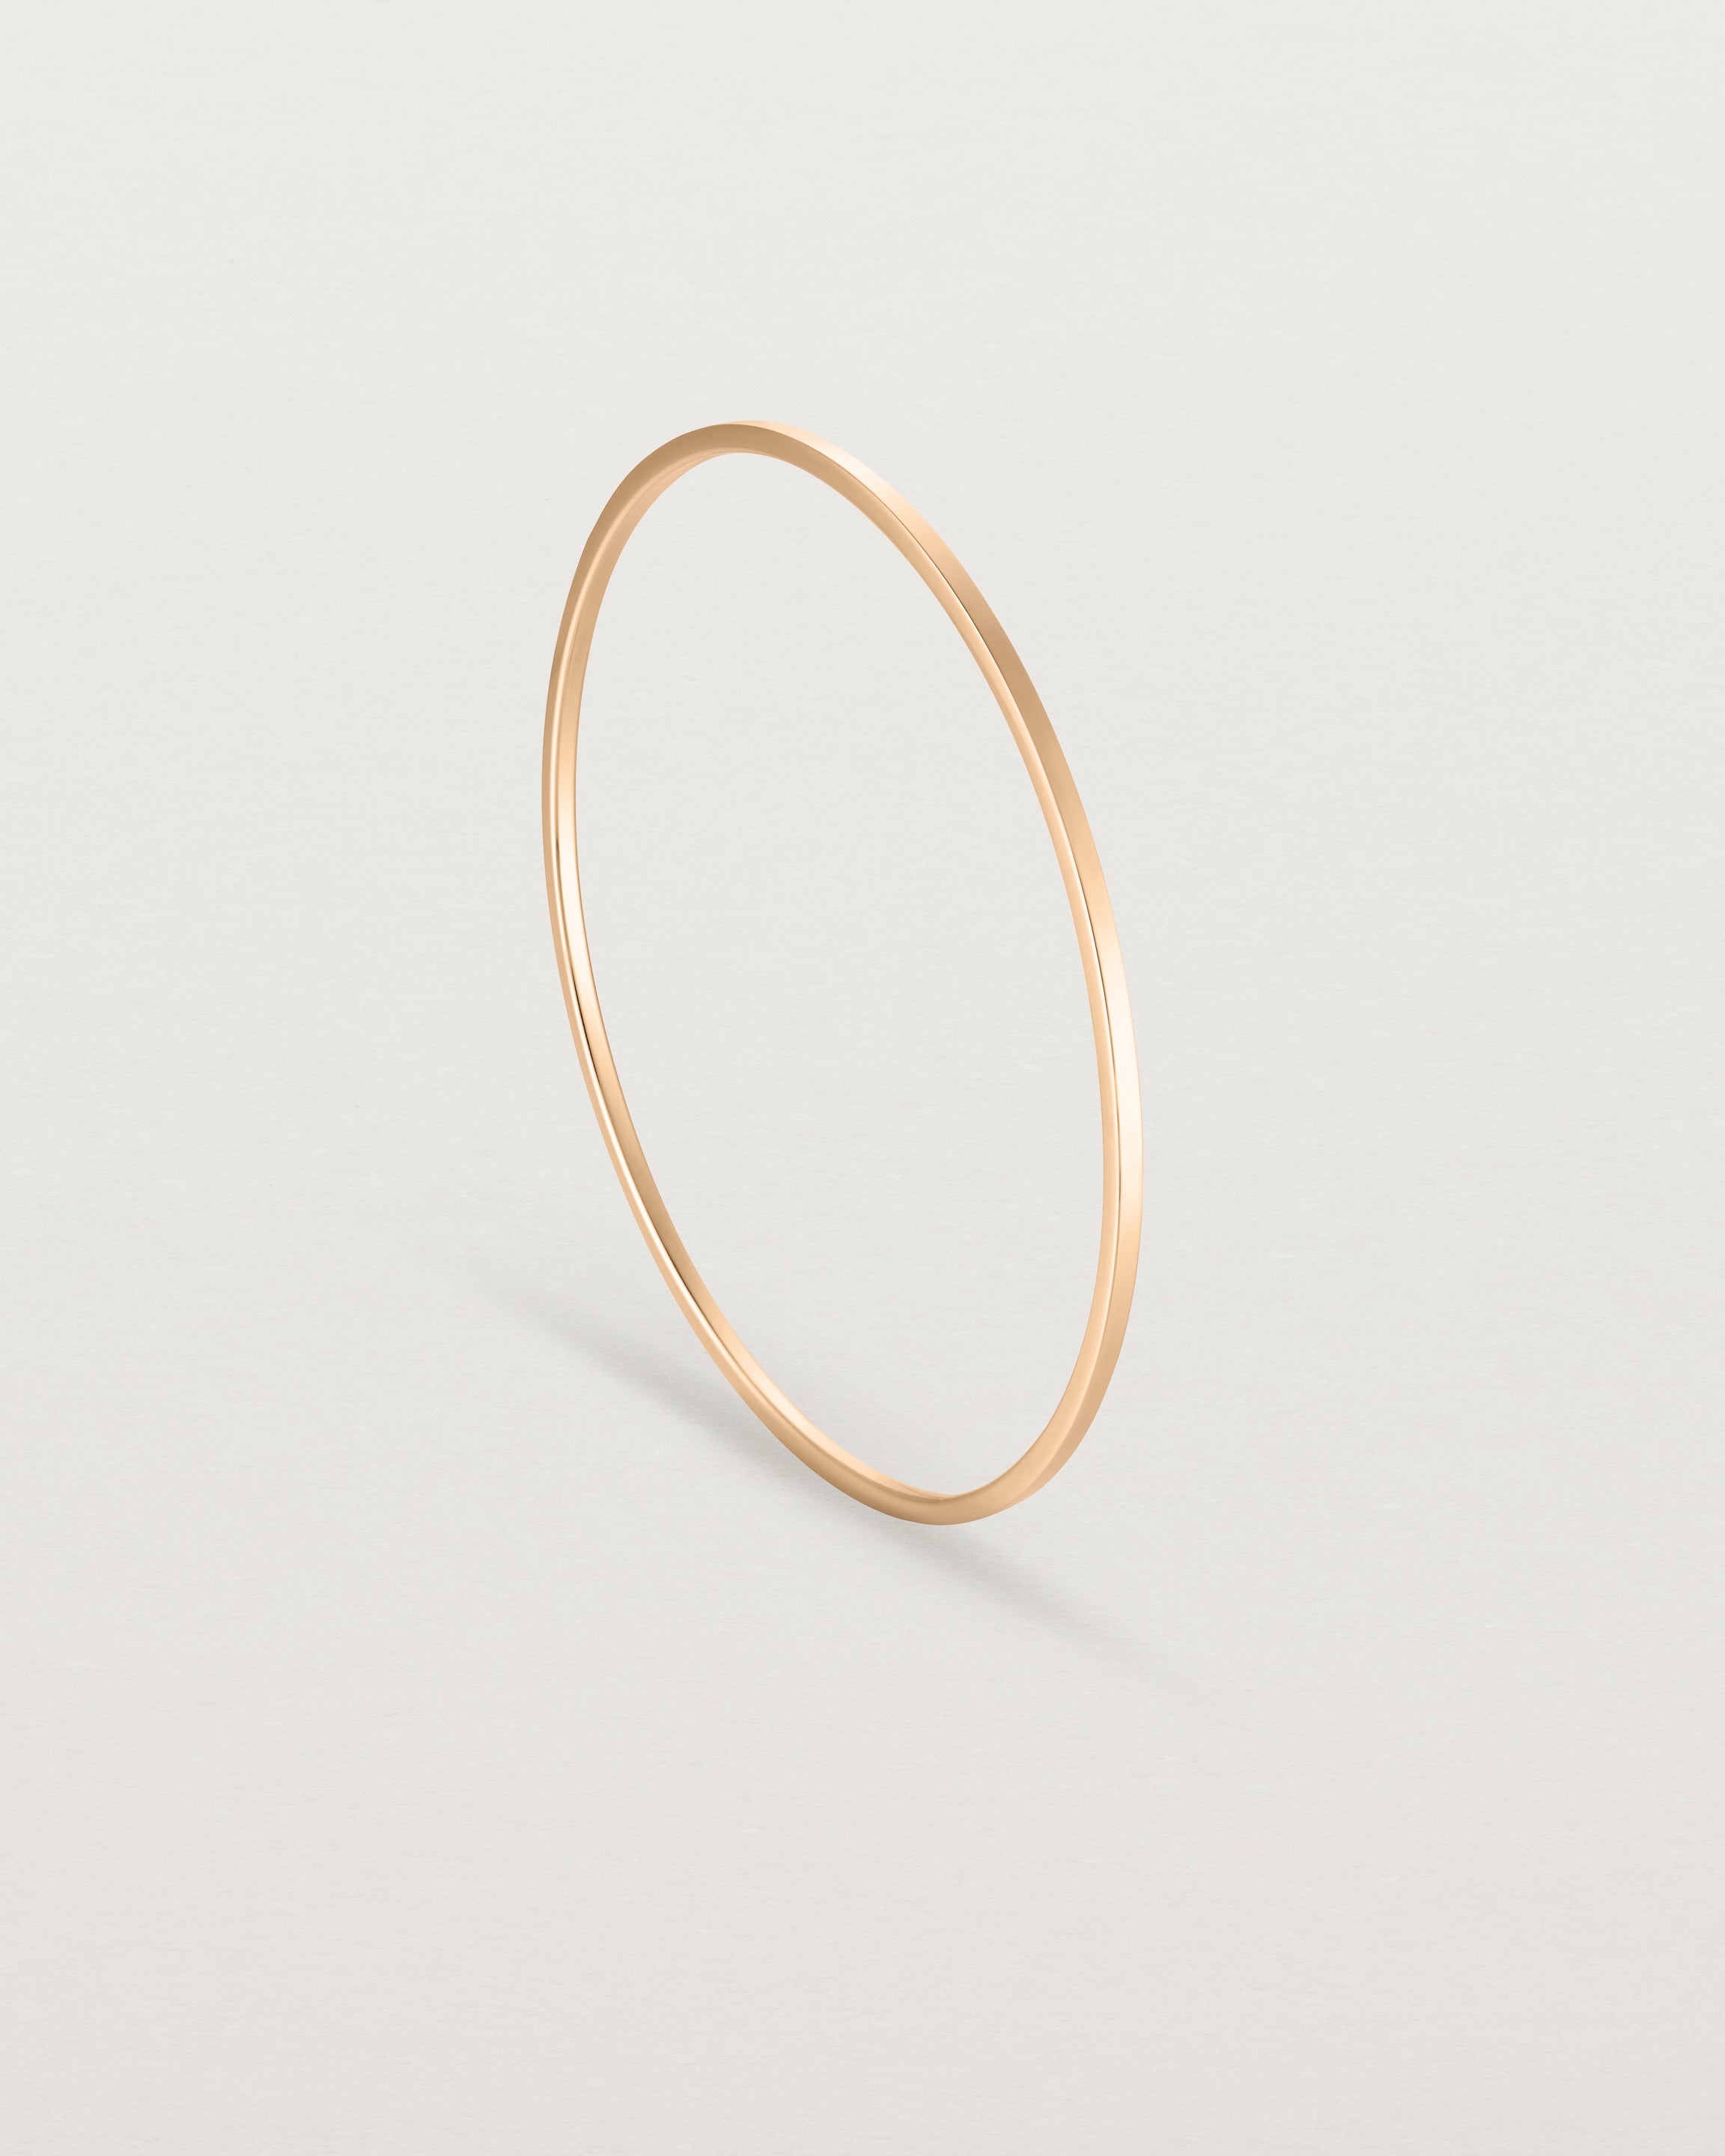 Standing view of the Antares Bangle in Rose Gold.